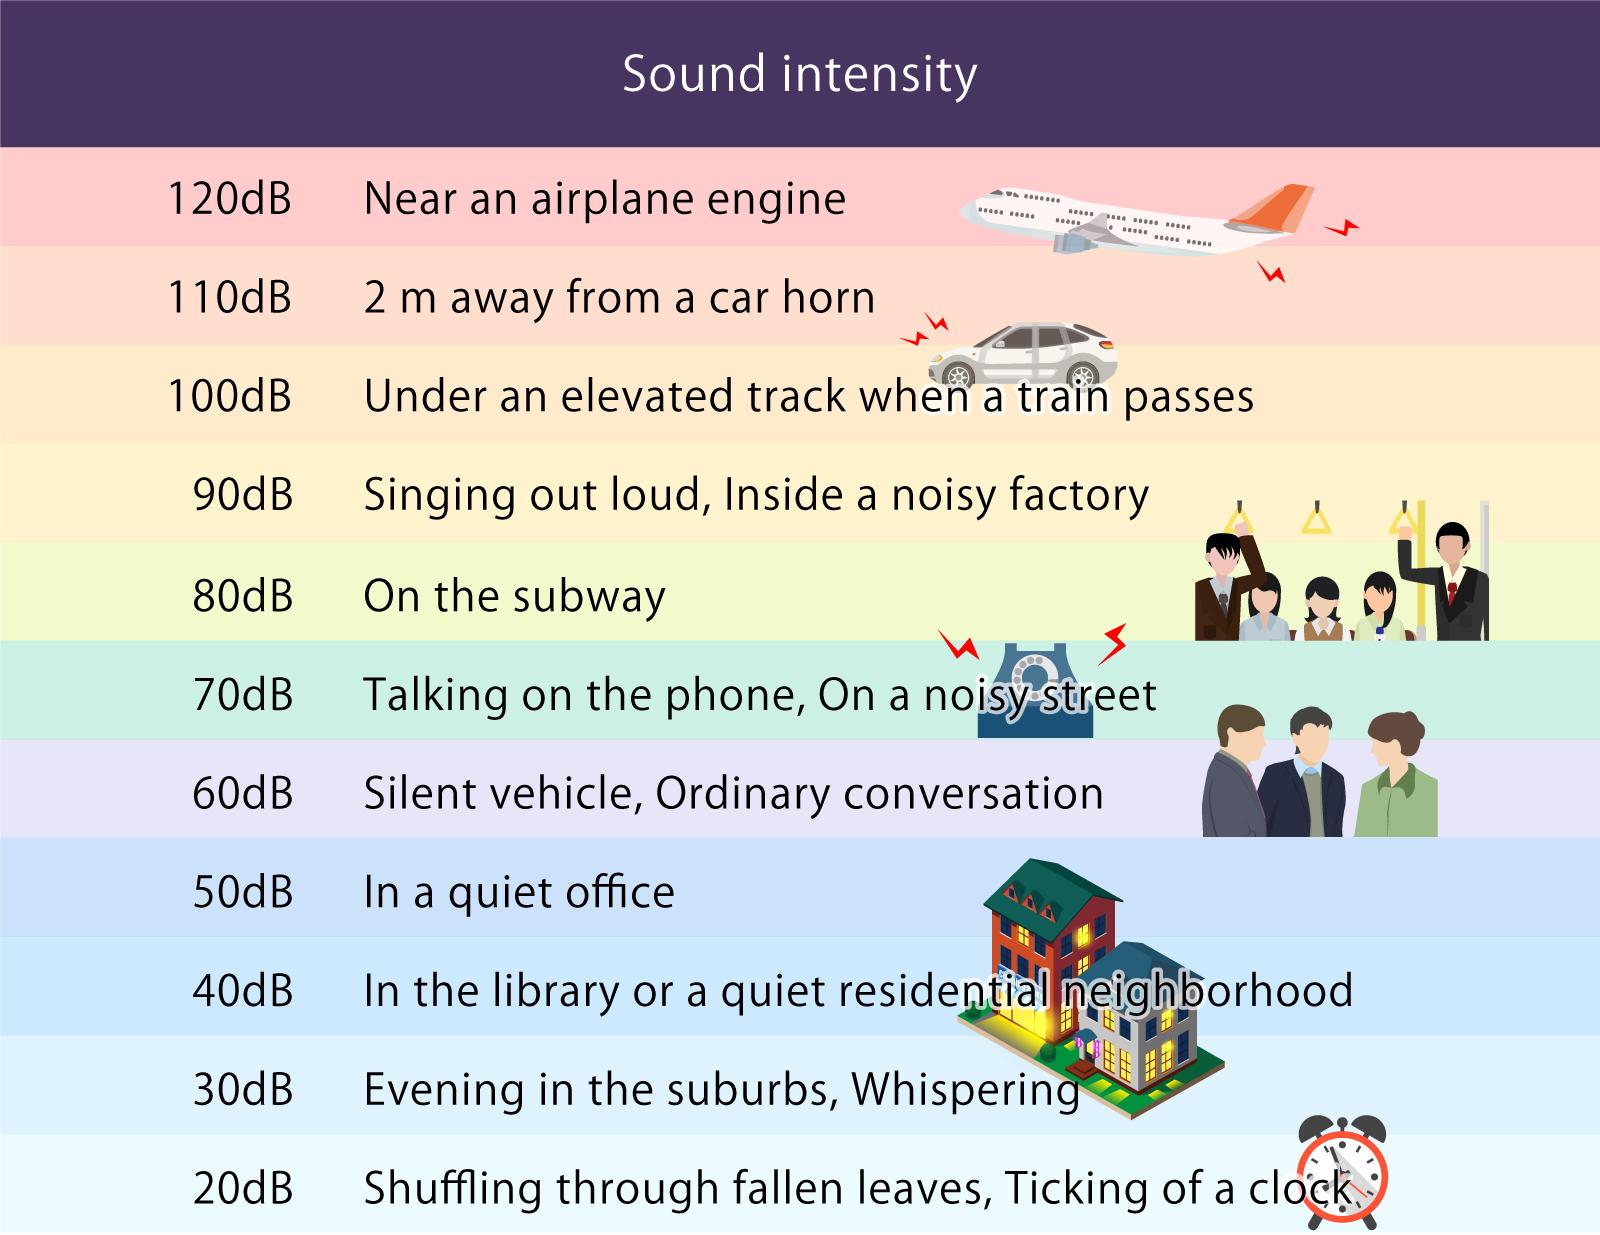 image: Intensities of common sounds. Sounds of 90 dB are very loud in any environment.